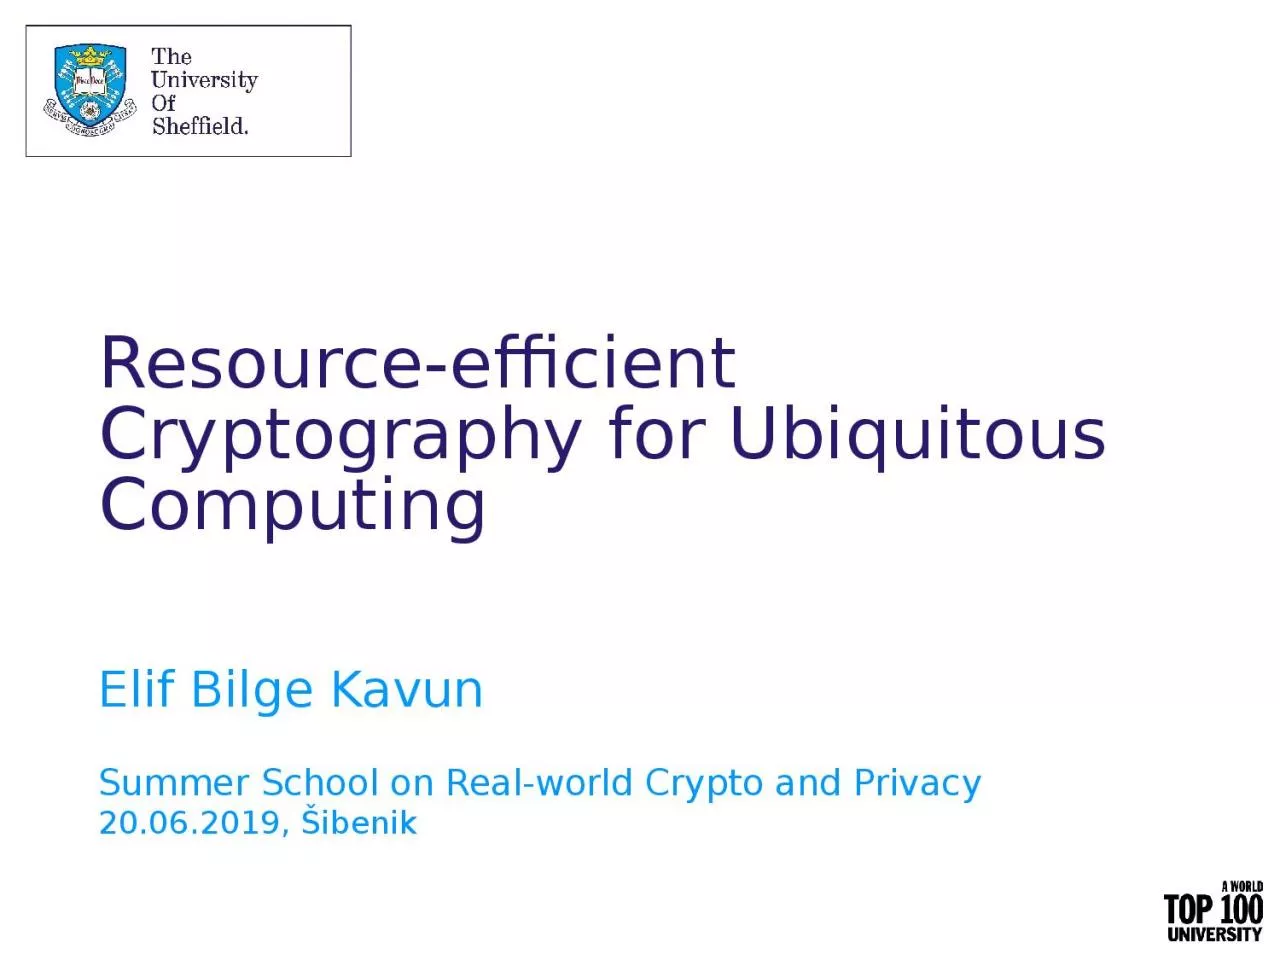 Resource-efficient Cryptography for Ubiquitous Computing